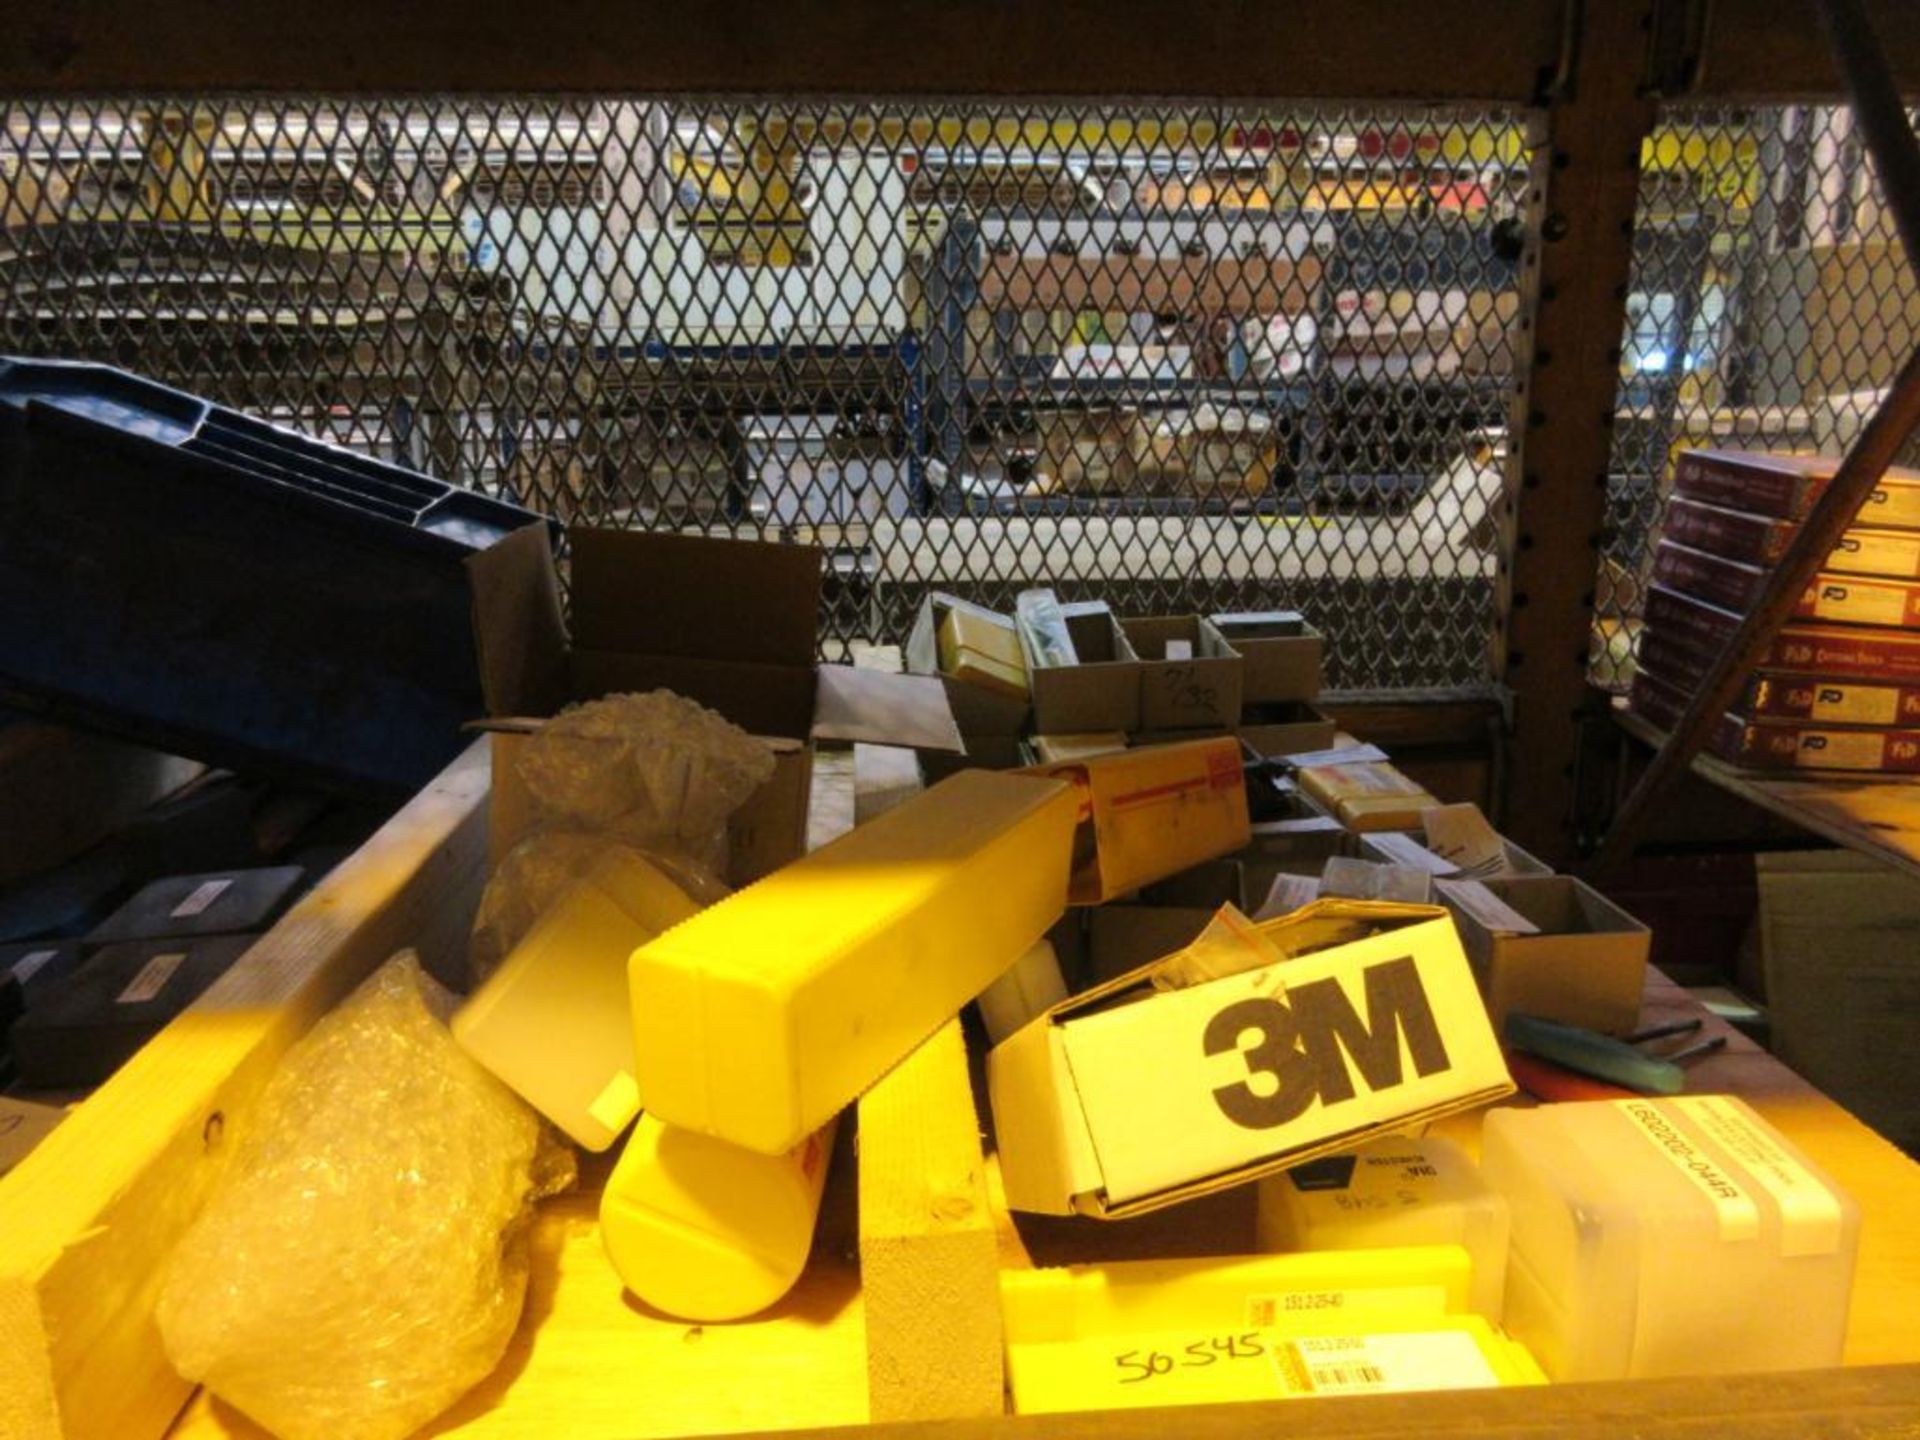 CONTENTS OF (22) SECTIONS PALLET RACK: ASSORTED ABRASIVES, SUNNEN STONES, TOOL BITS, DOVETAIL CUTTER - Image 36 of 43